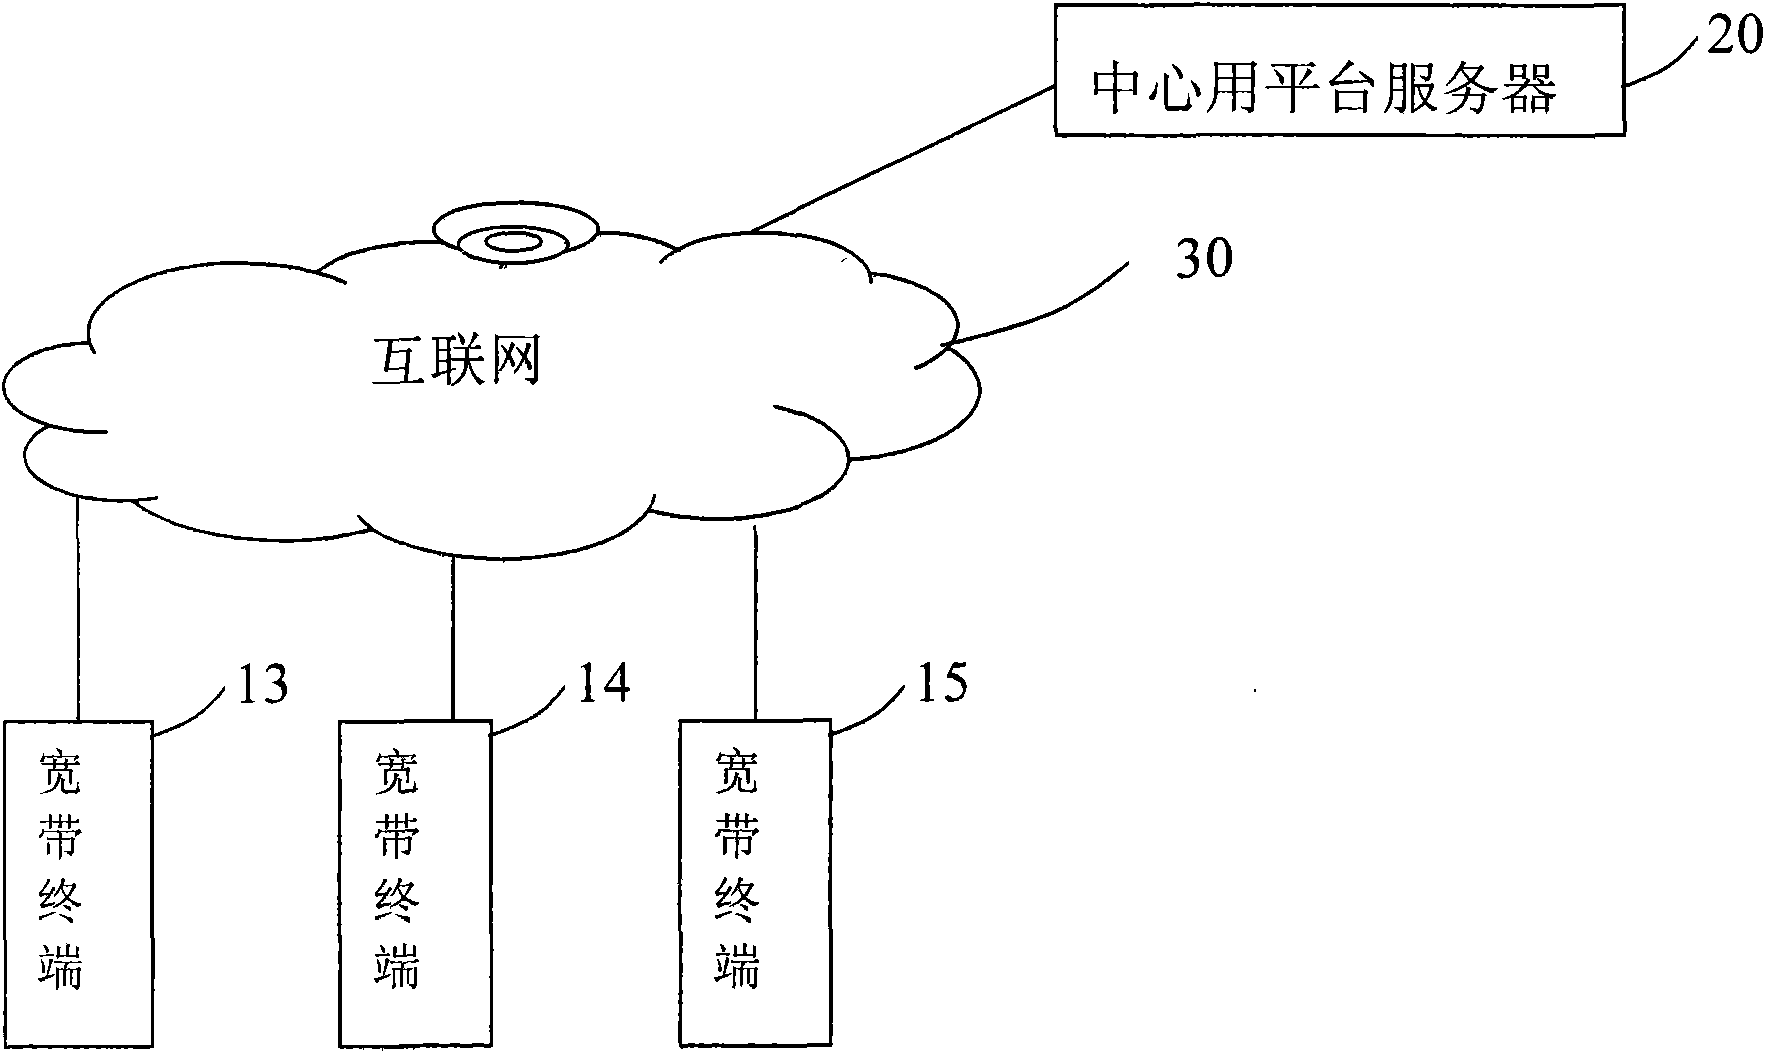 Method for analyzing multi-line multifunctional domain names of network and broadband terminal software